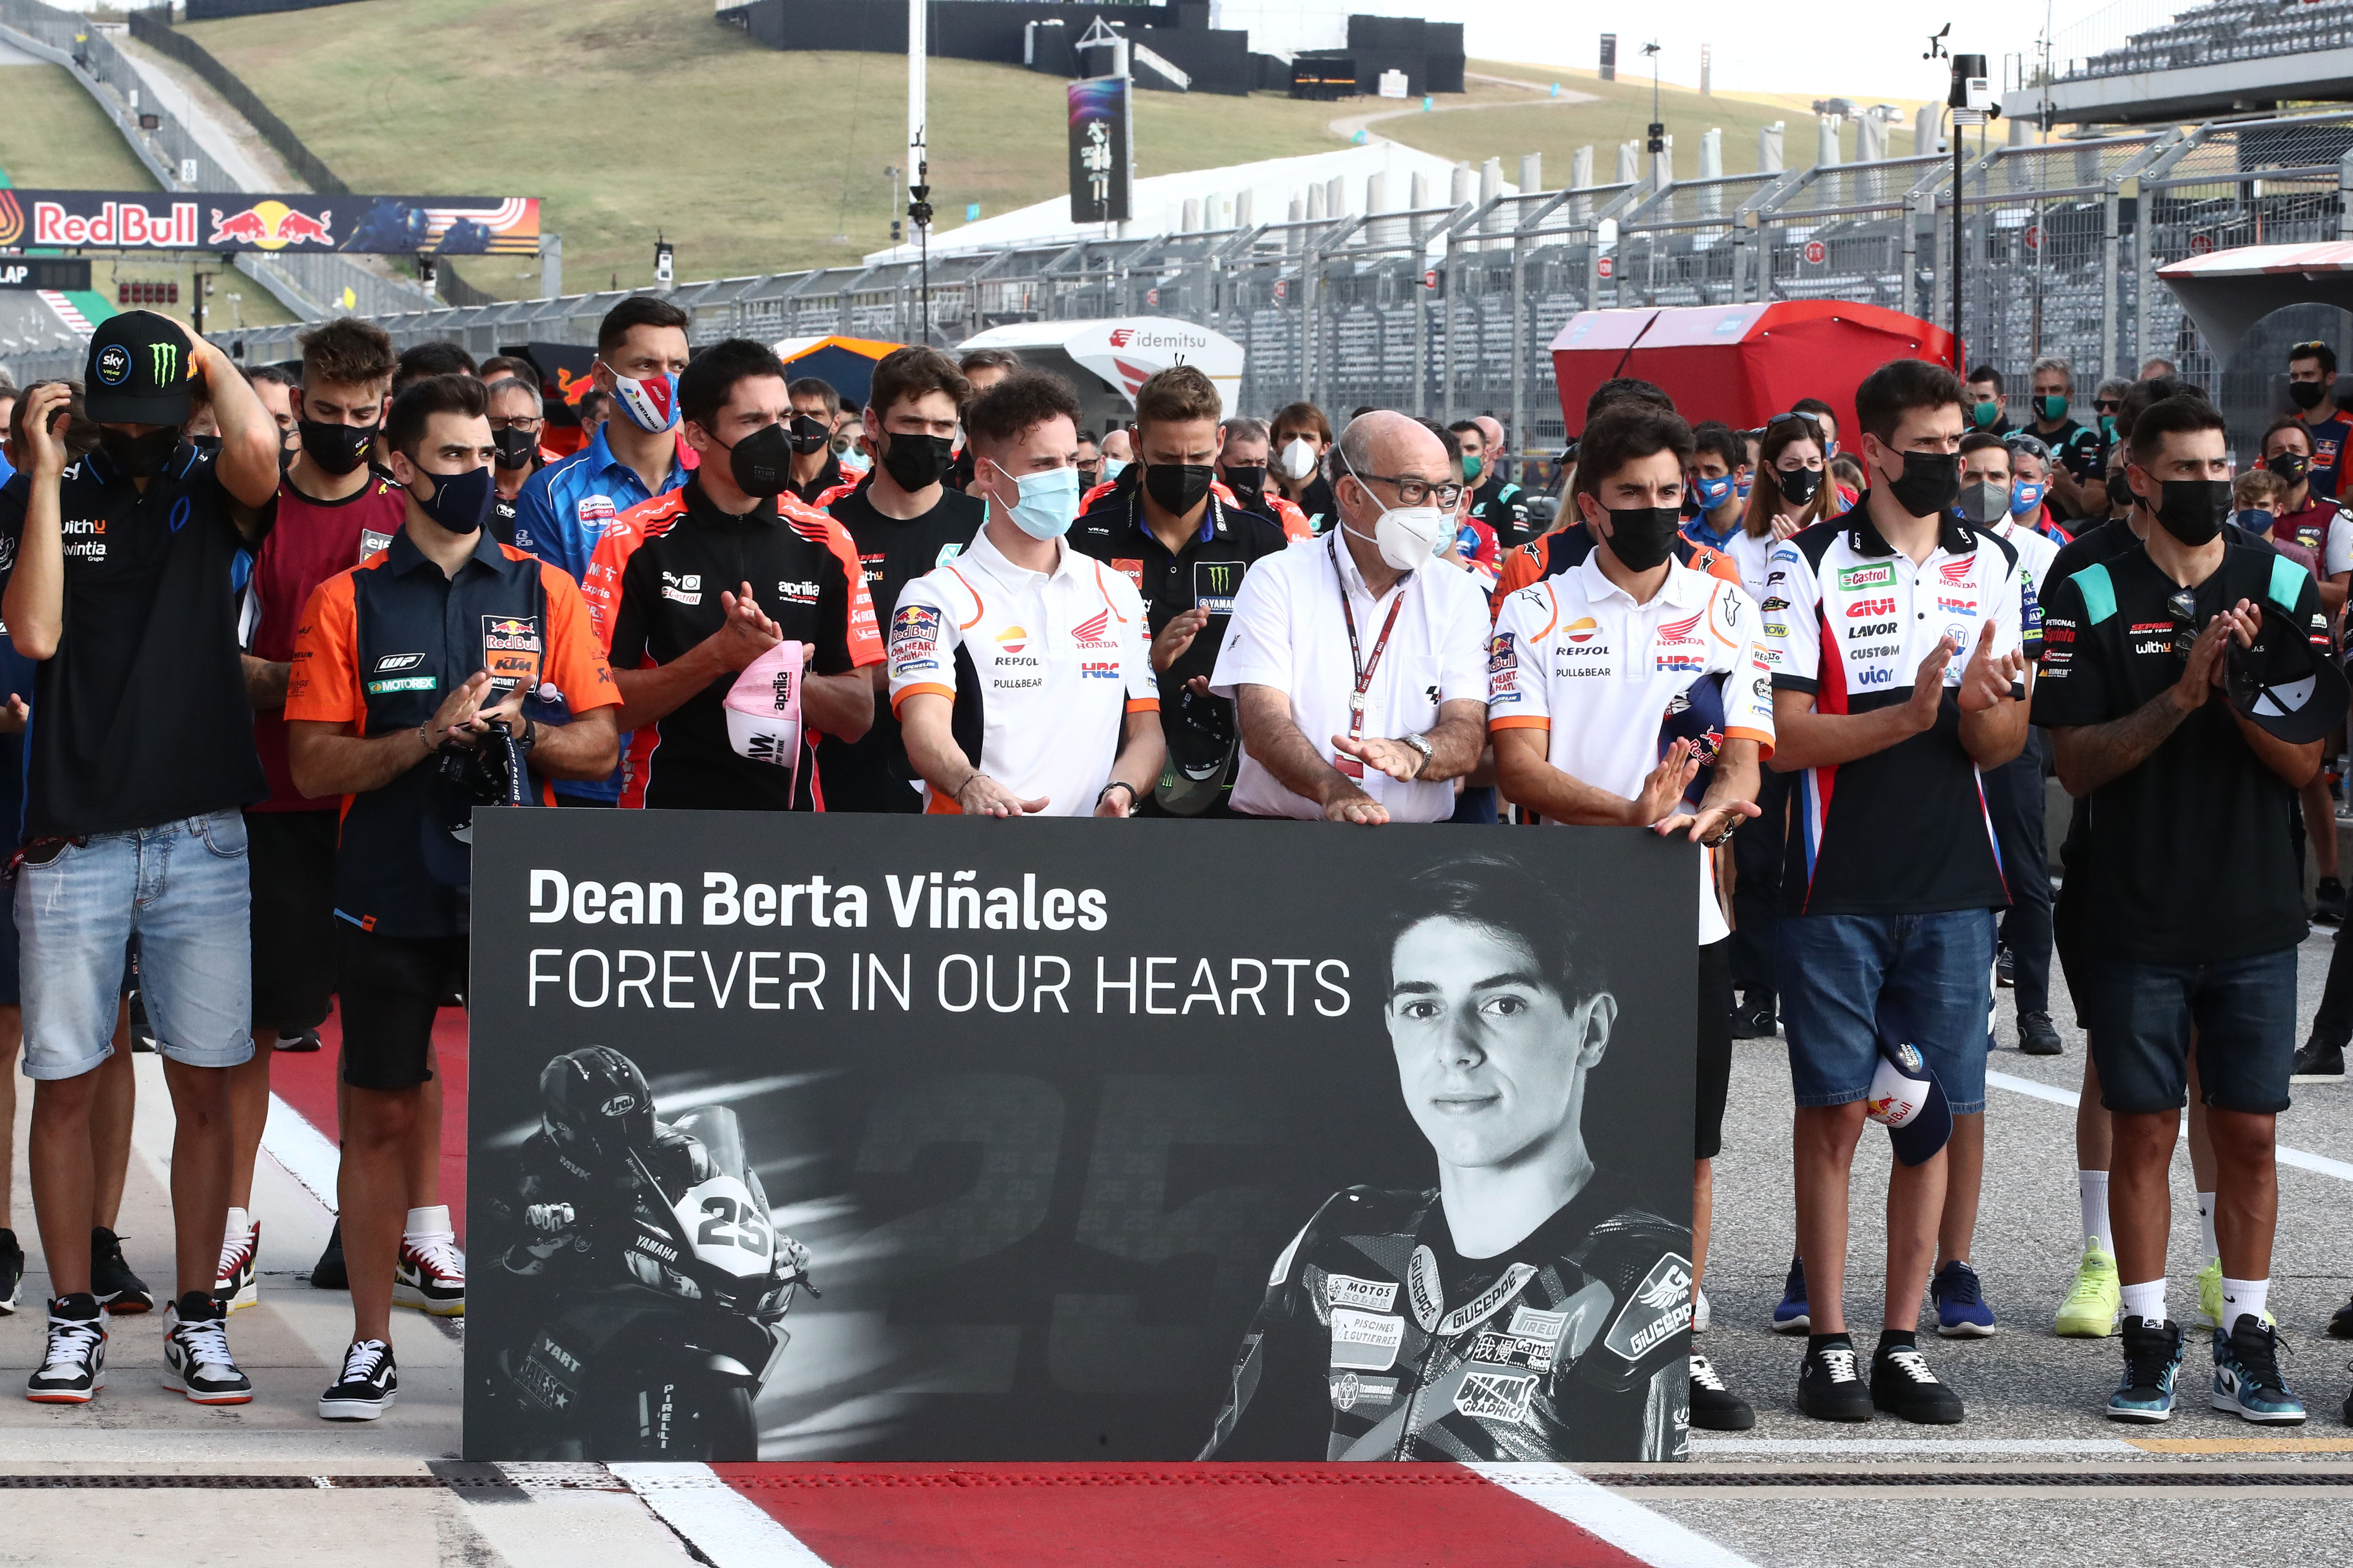 Berta Vinales Motorcycle Dean A moment of silence